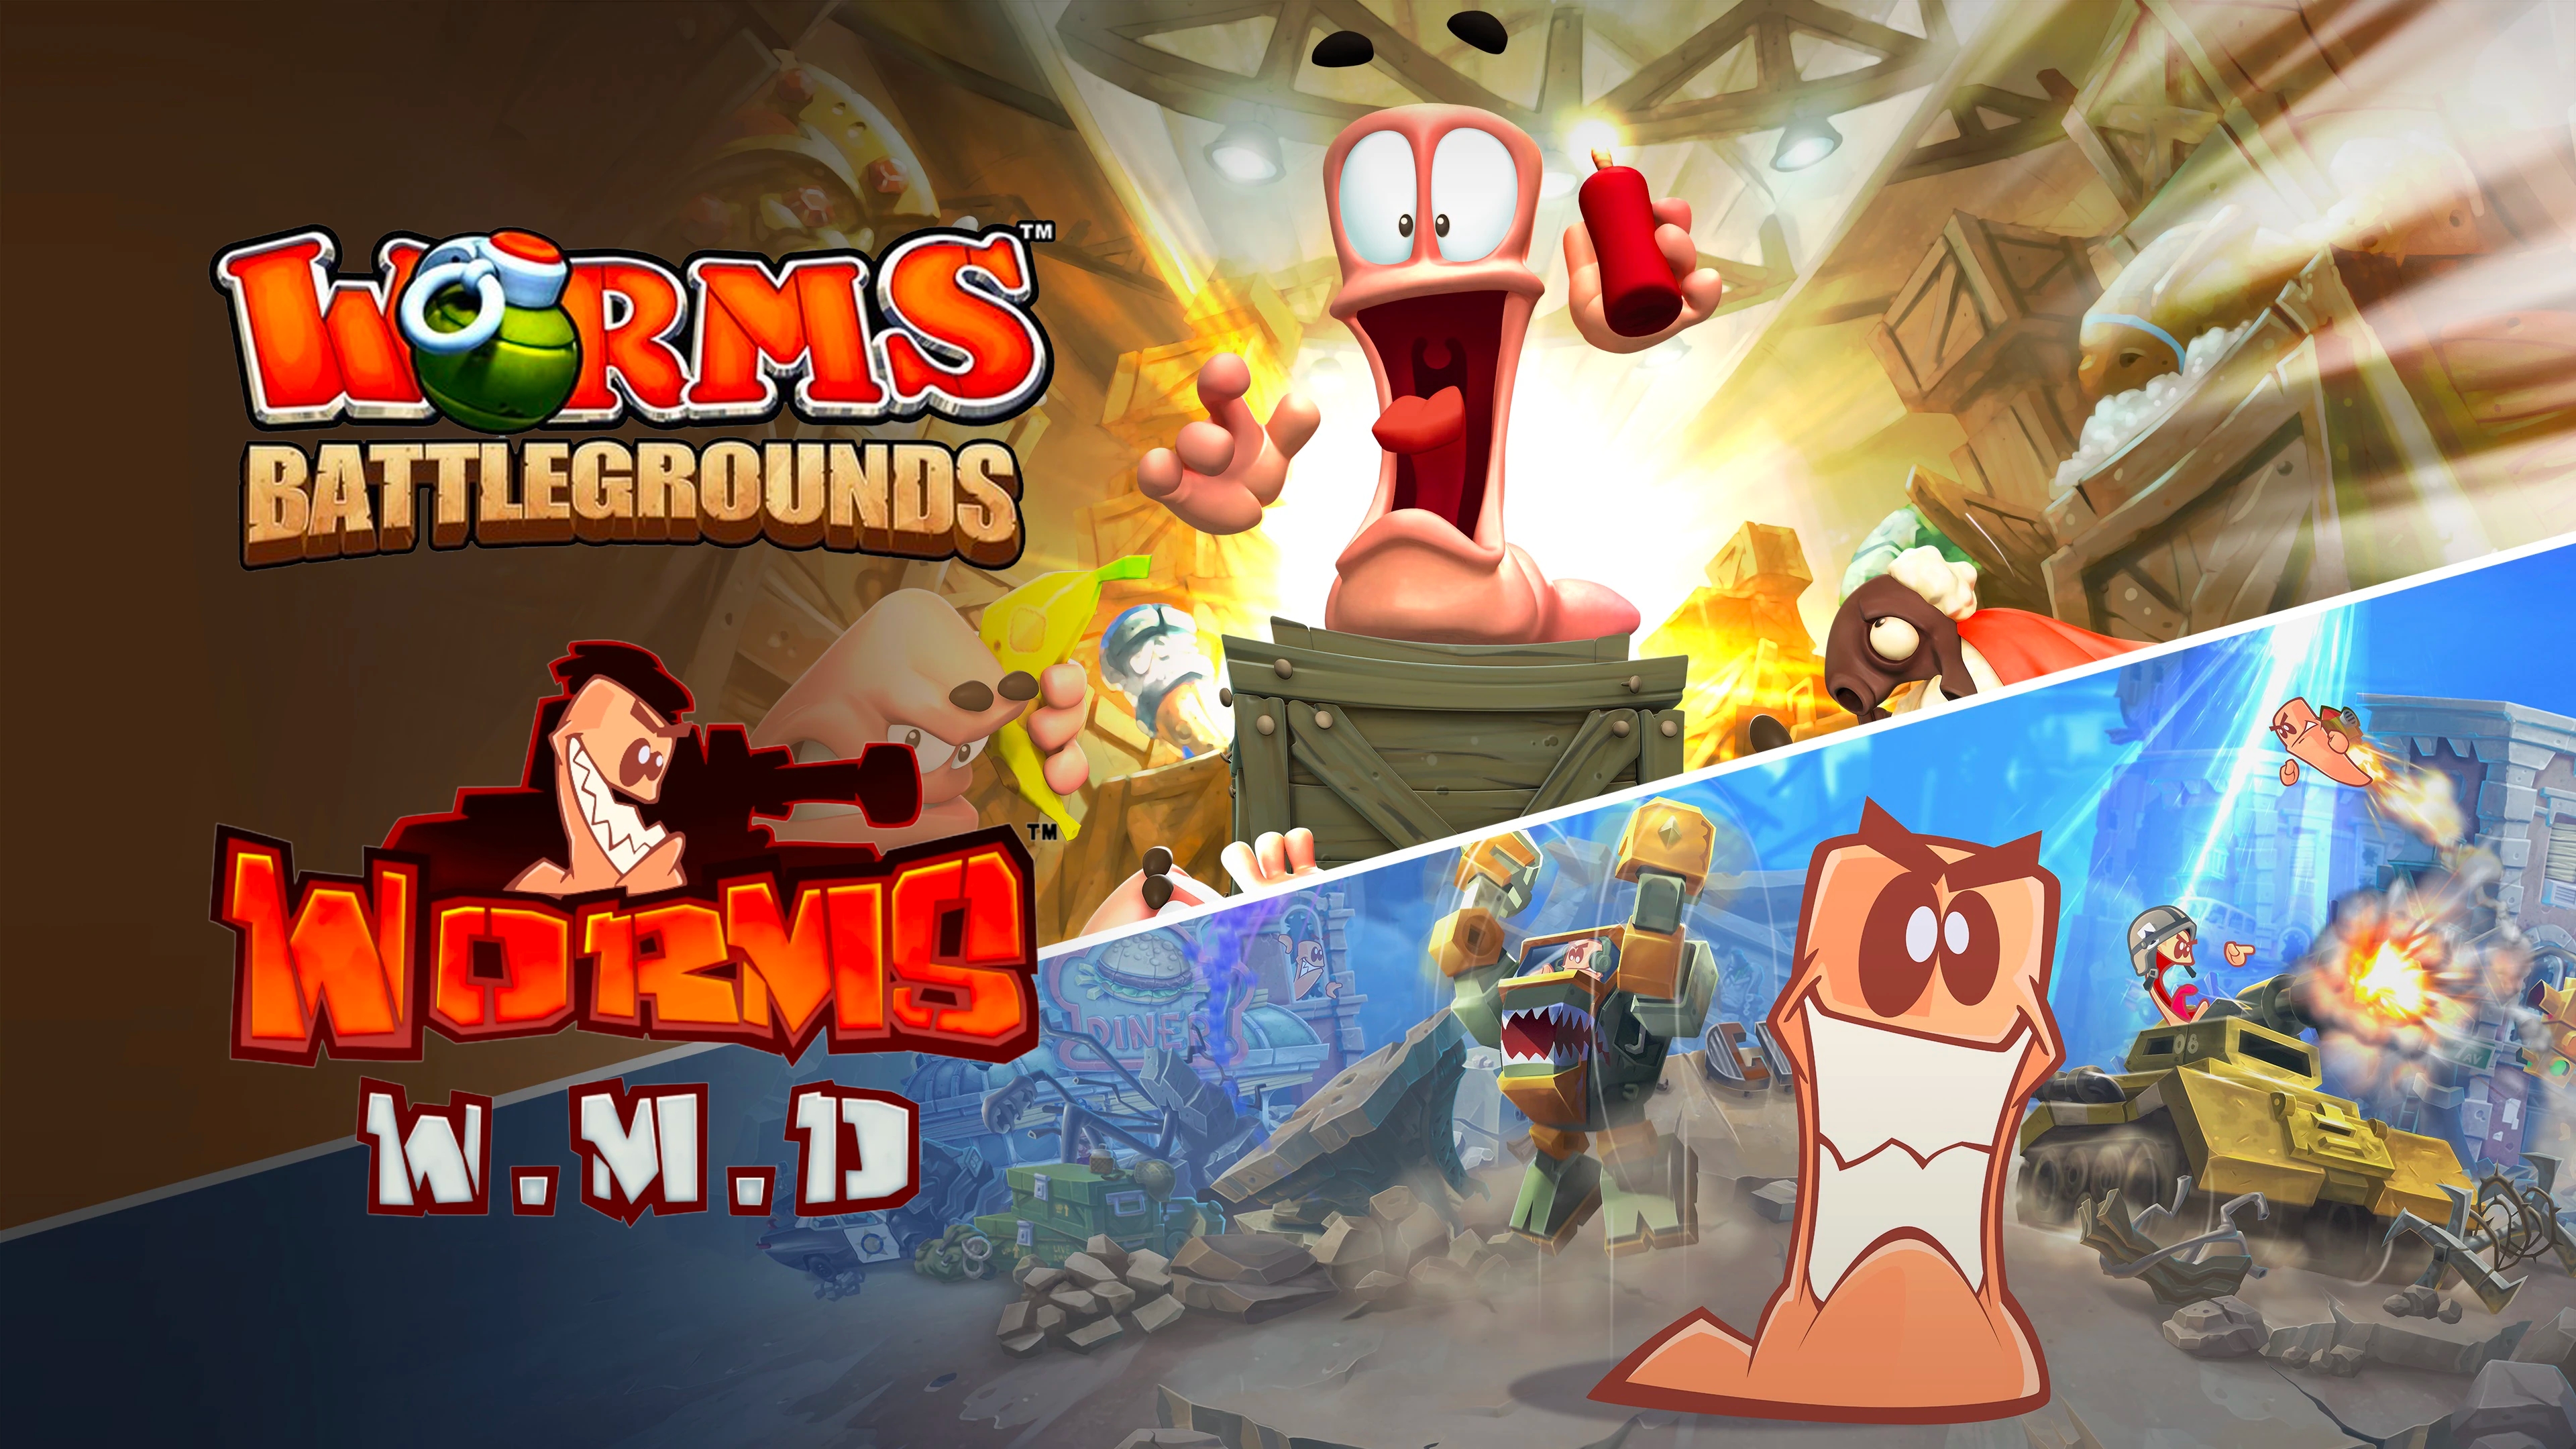 Worms ps4. Worms w.m.d ps4. Worms Battlegrounds + worms w.m.d. Worms WMD игра.